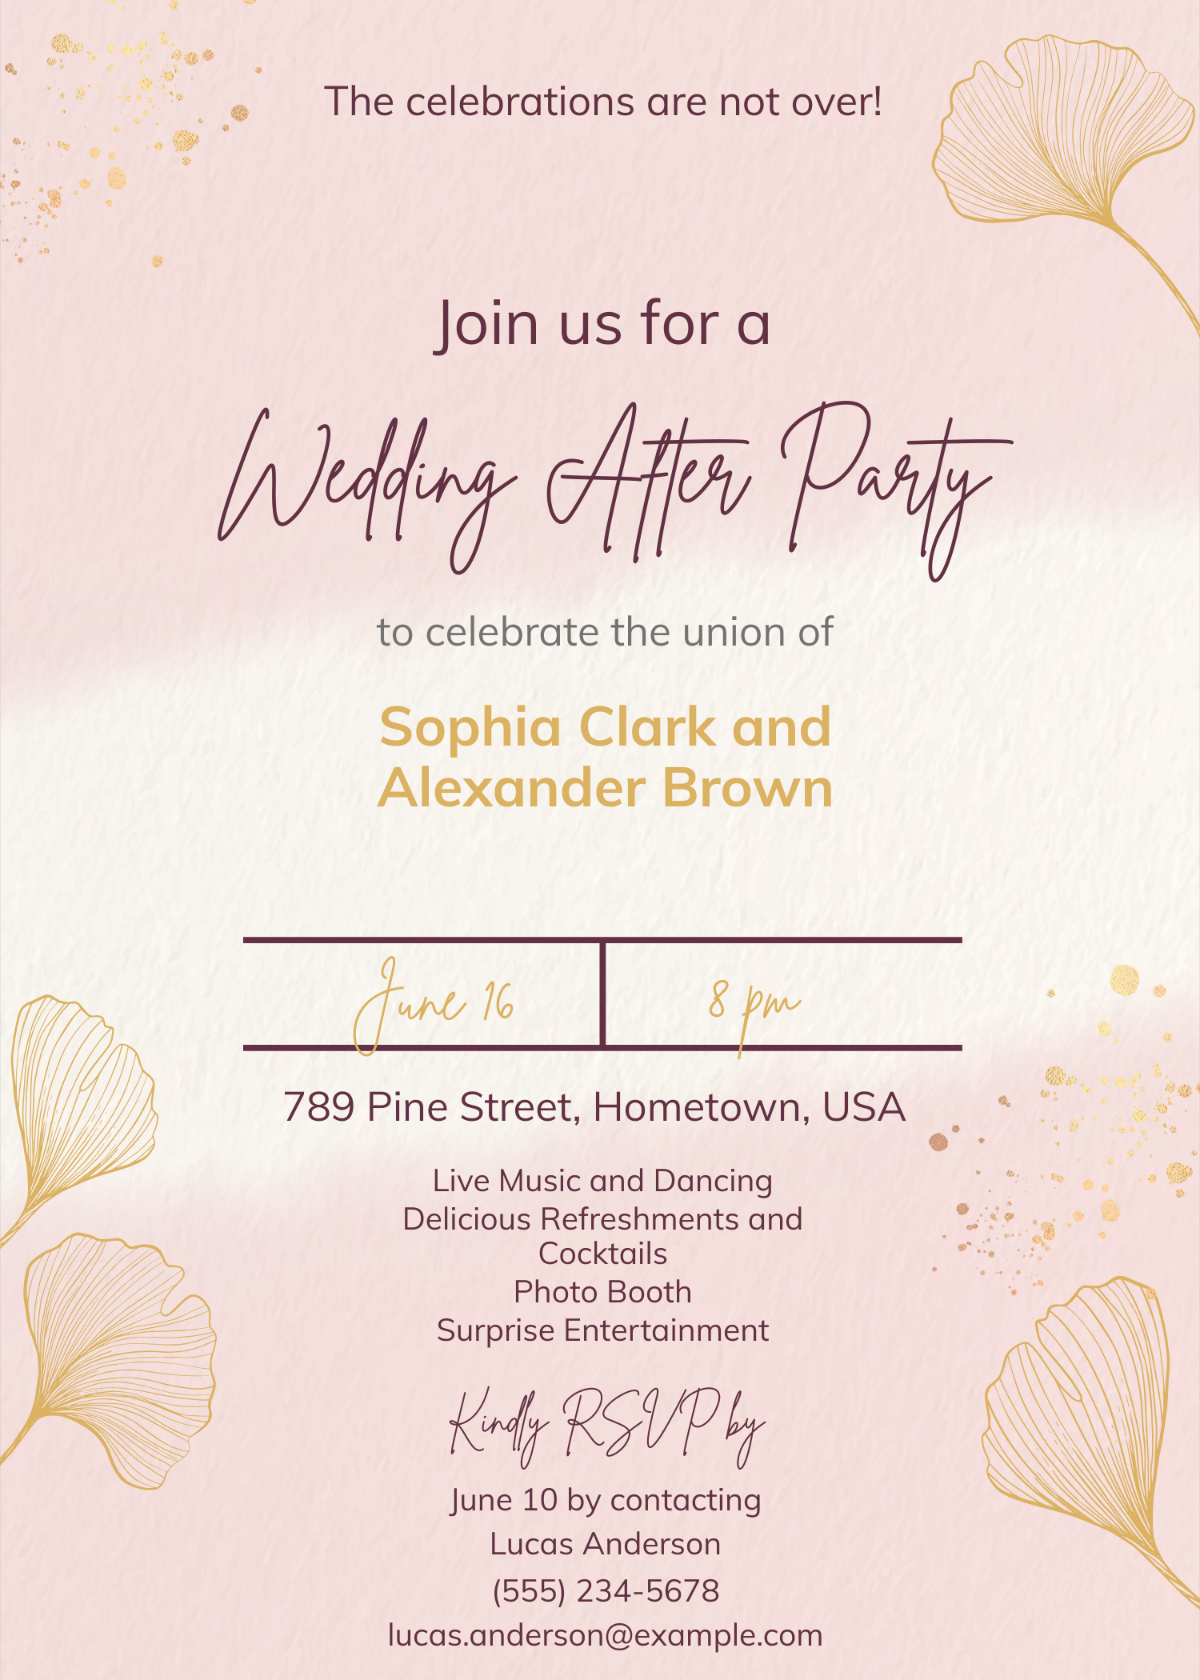 Wedding After Party Invitation